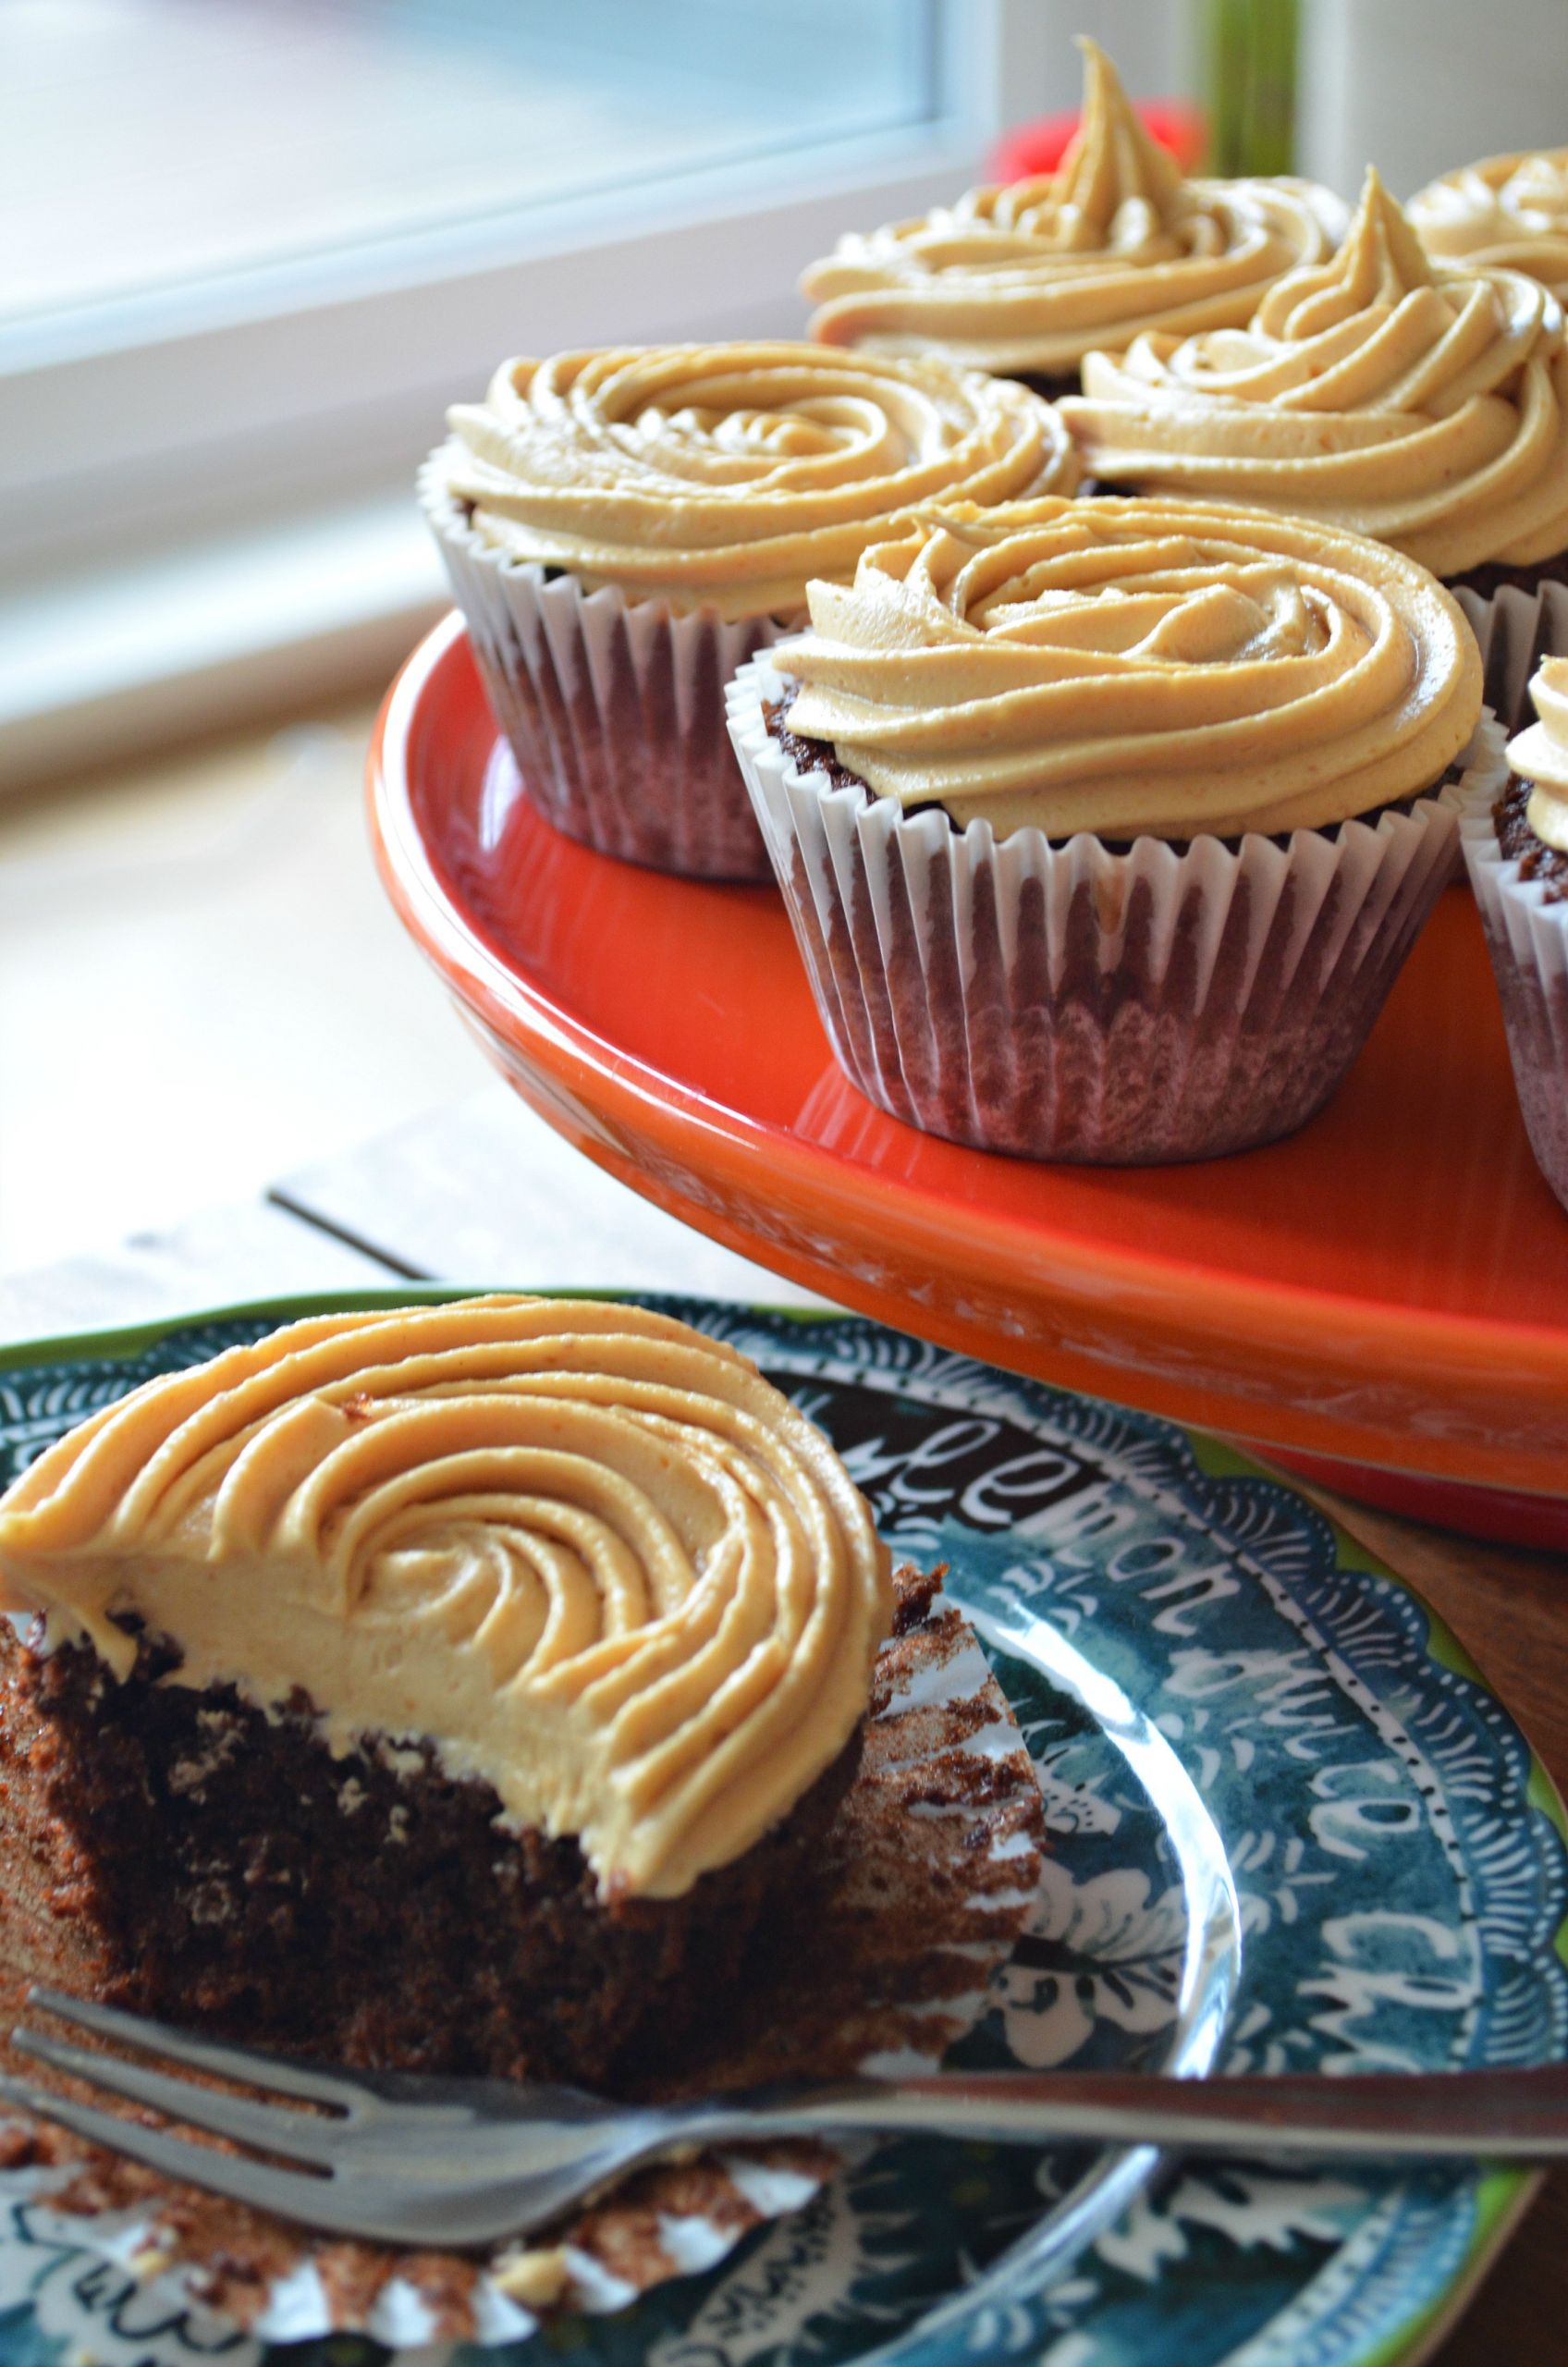 Chocolate Cupcakes With Peanut Butter Frosting
 Chocolate Cupcakes with Peanut Butter Frosting Video